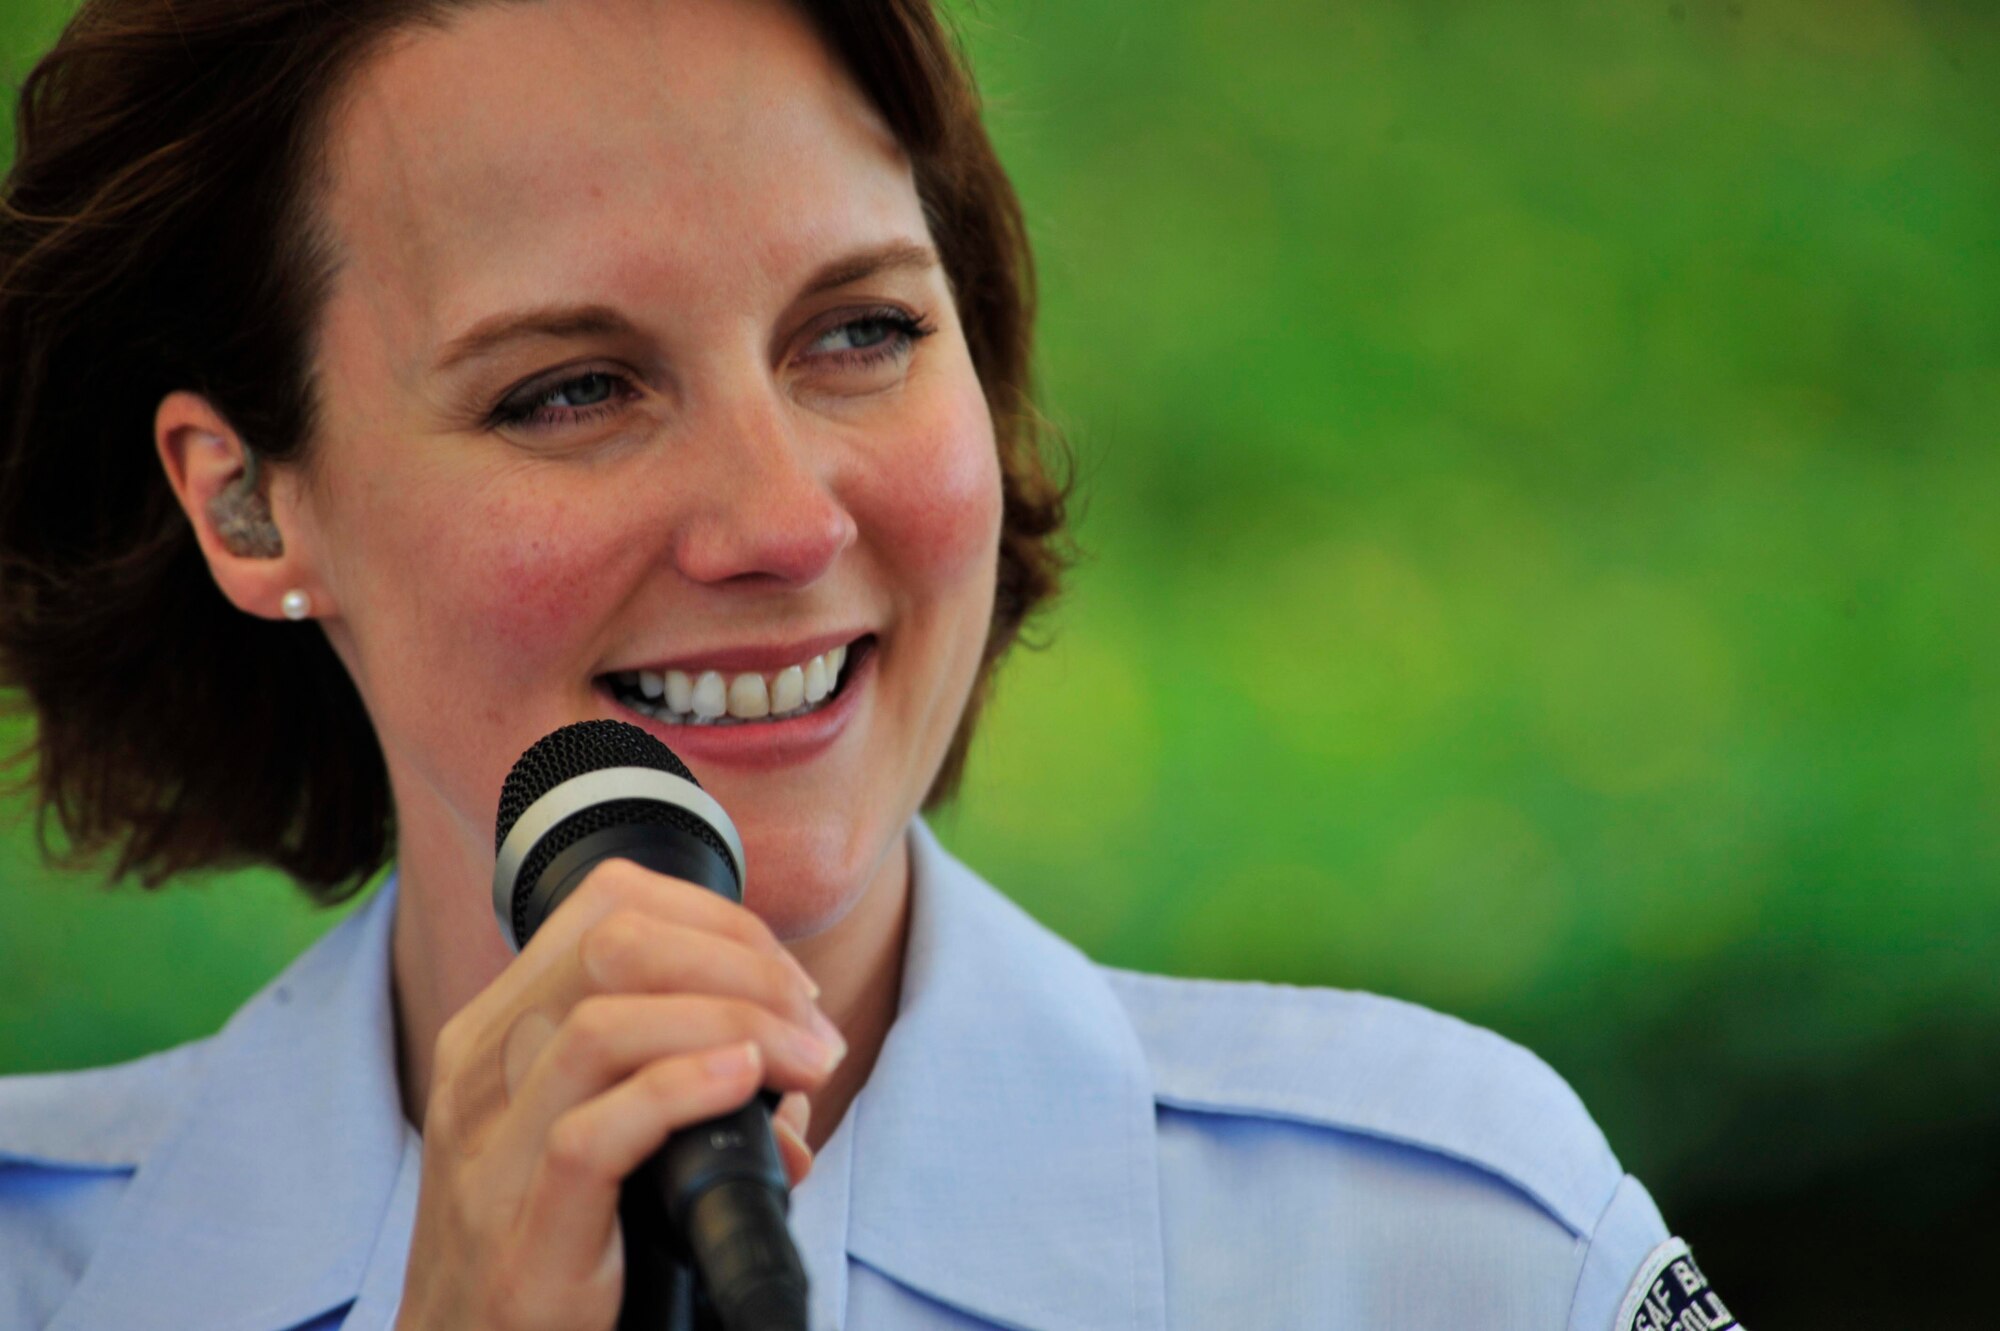 The United States Air Force Central Command Expeditionary Band visited Nairobi, Kenya for the first time November and played in different venues throughout the area.  Tech. Sgt. Paula Goetz, one of the band's vocalists sings for a crowd at the U.S. embassy in Kenya.  They also played for the U.S. ambassador and invited guests at his residence house, other performances included civic centers  and universities with crowds exceeding 1,800 people  .(U.S. Navy Photo/Petty Officer 1st Class Scott Cohen)(Released)